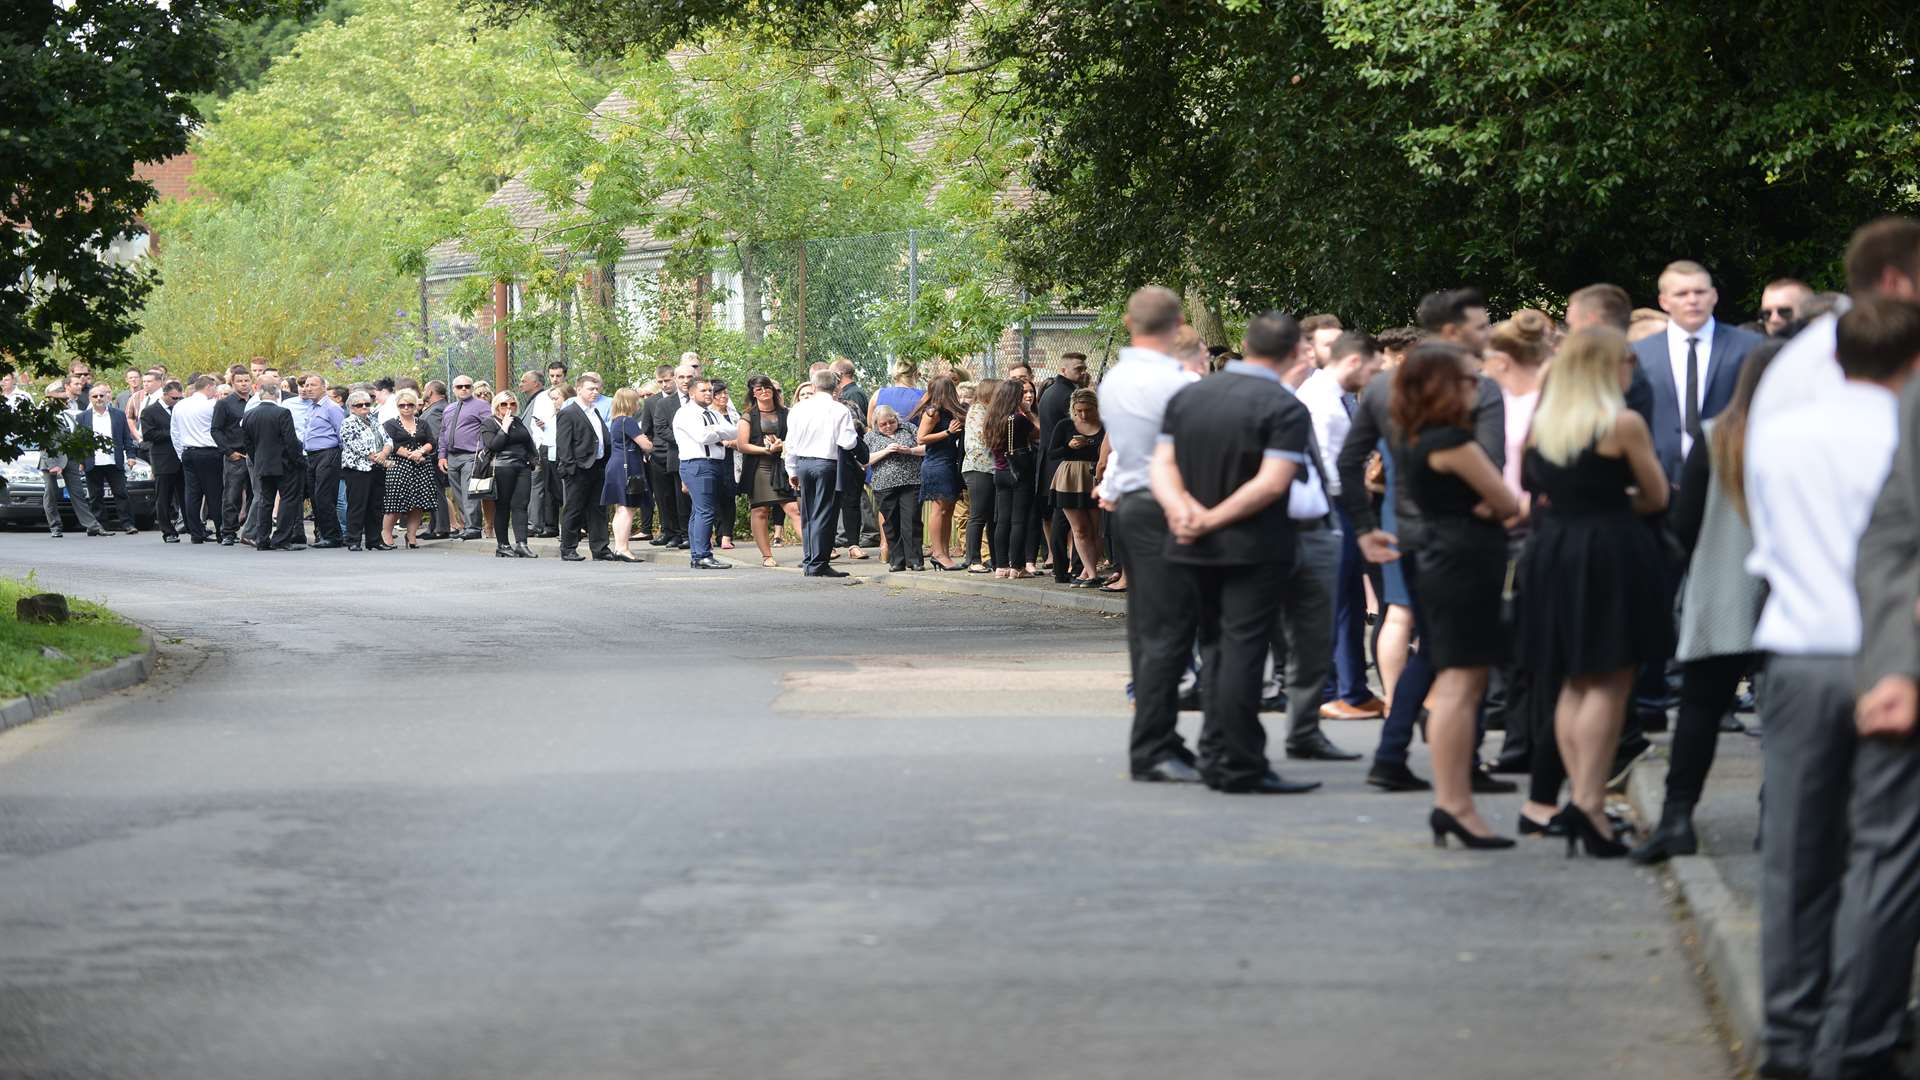 Hundreds of people attended the service for Josh